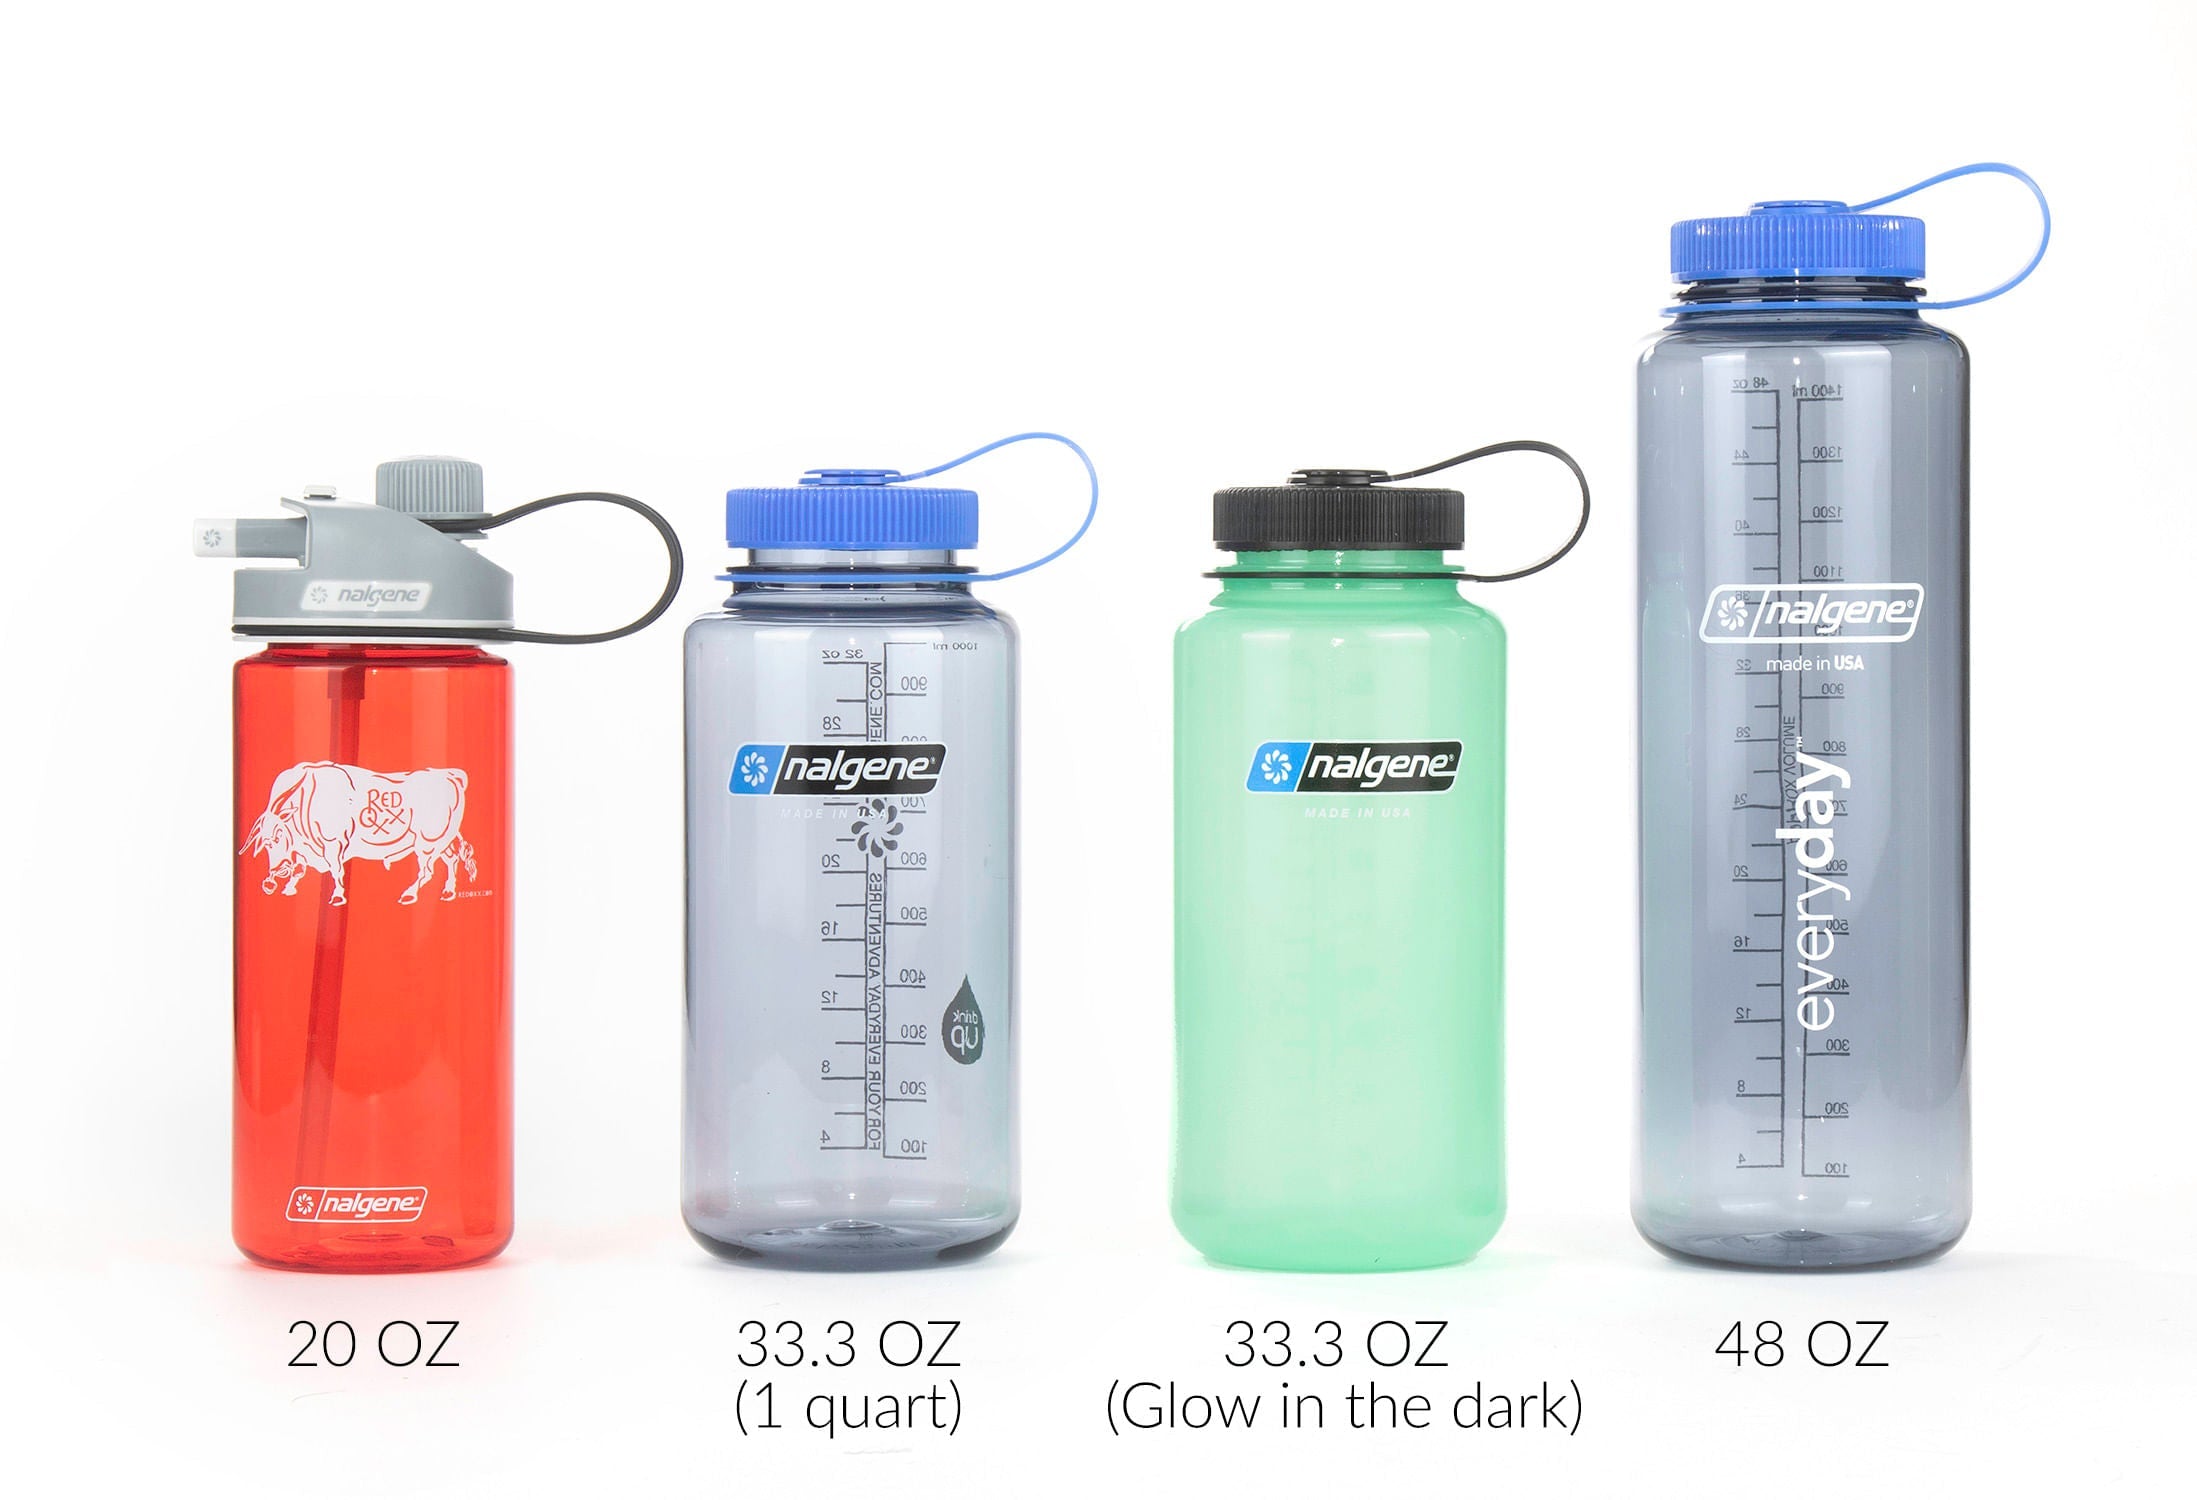 Wide Mouth Water Bottles, 32 oz